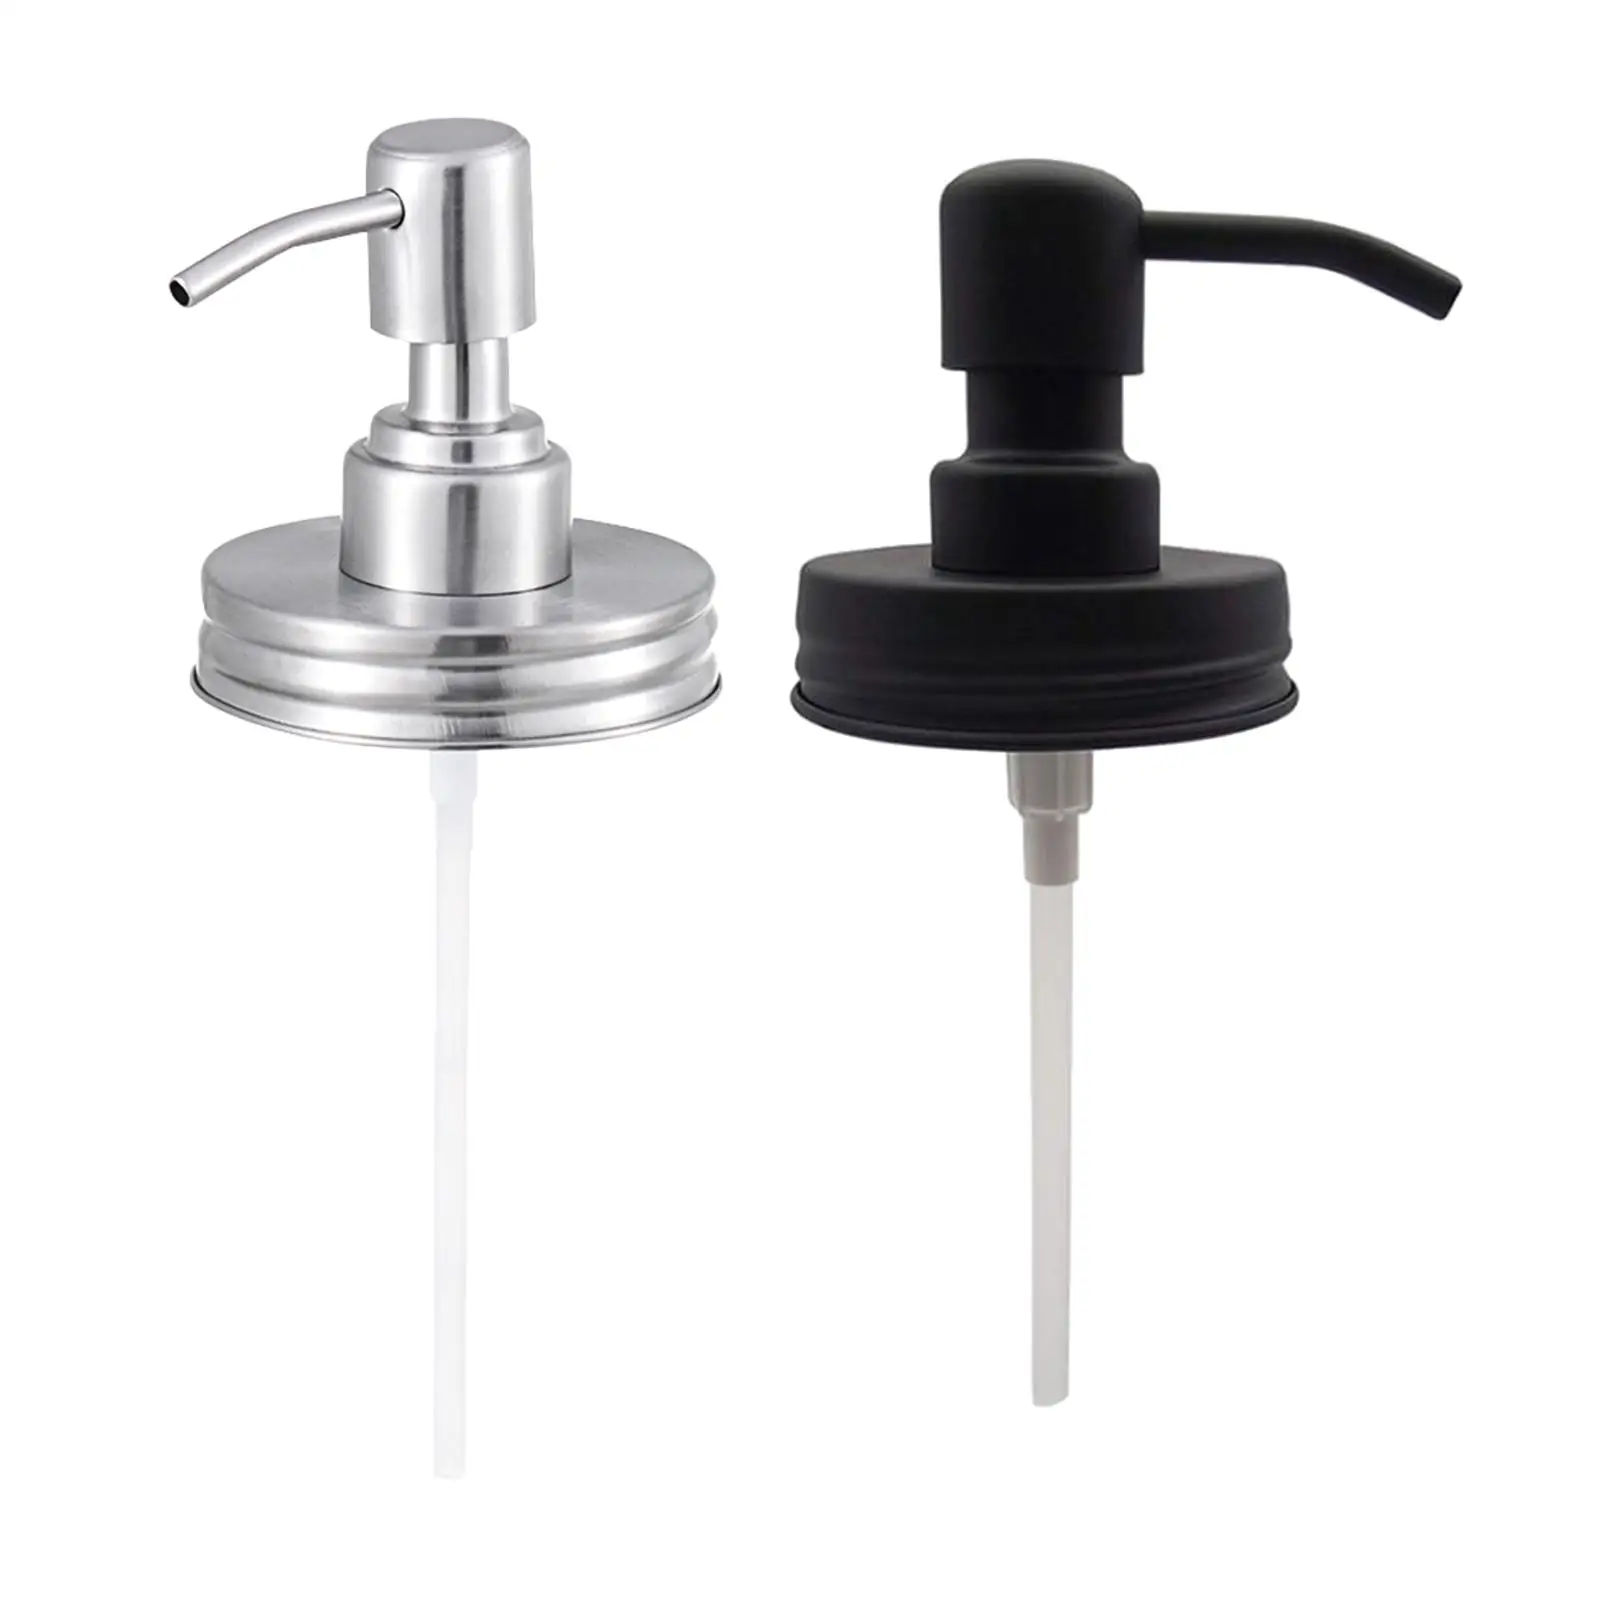 Stainless Steel, Soap Pump Nozzle Head, Lotion Dispenser Pump Head, for Kitchen Sink Bathroom Countertop Parts Accessories